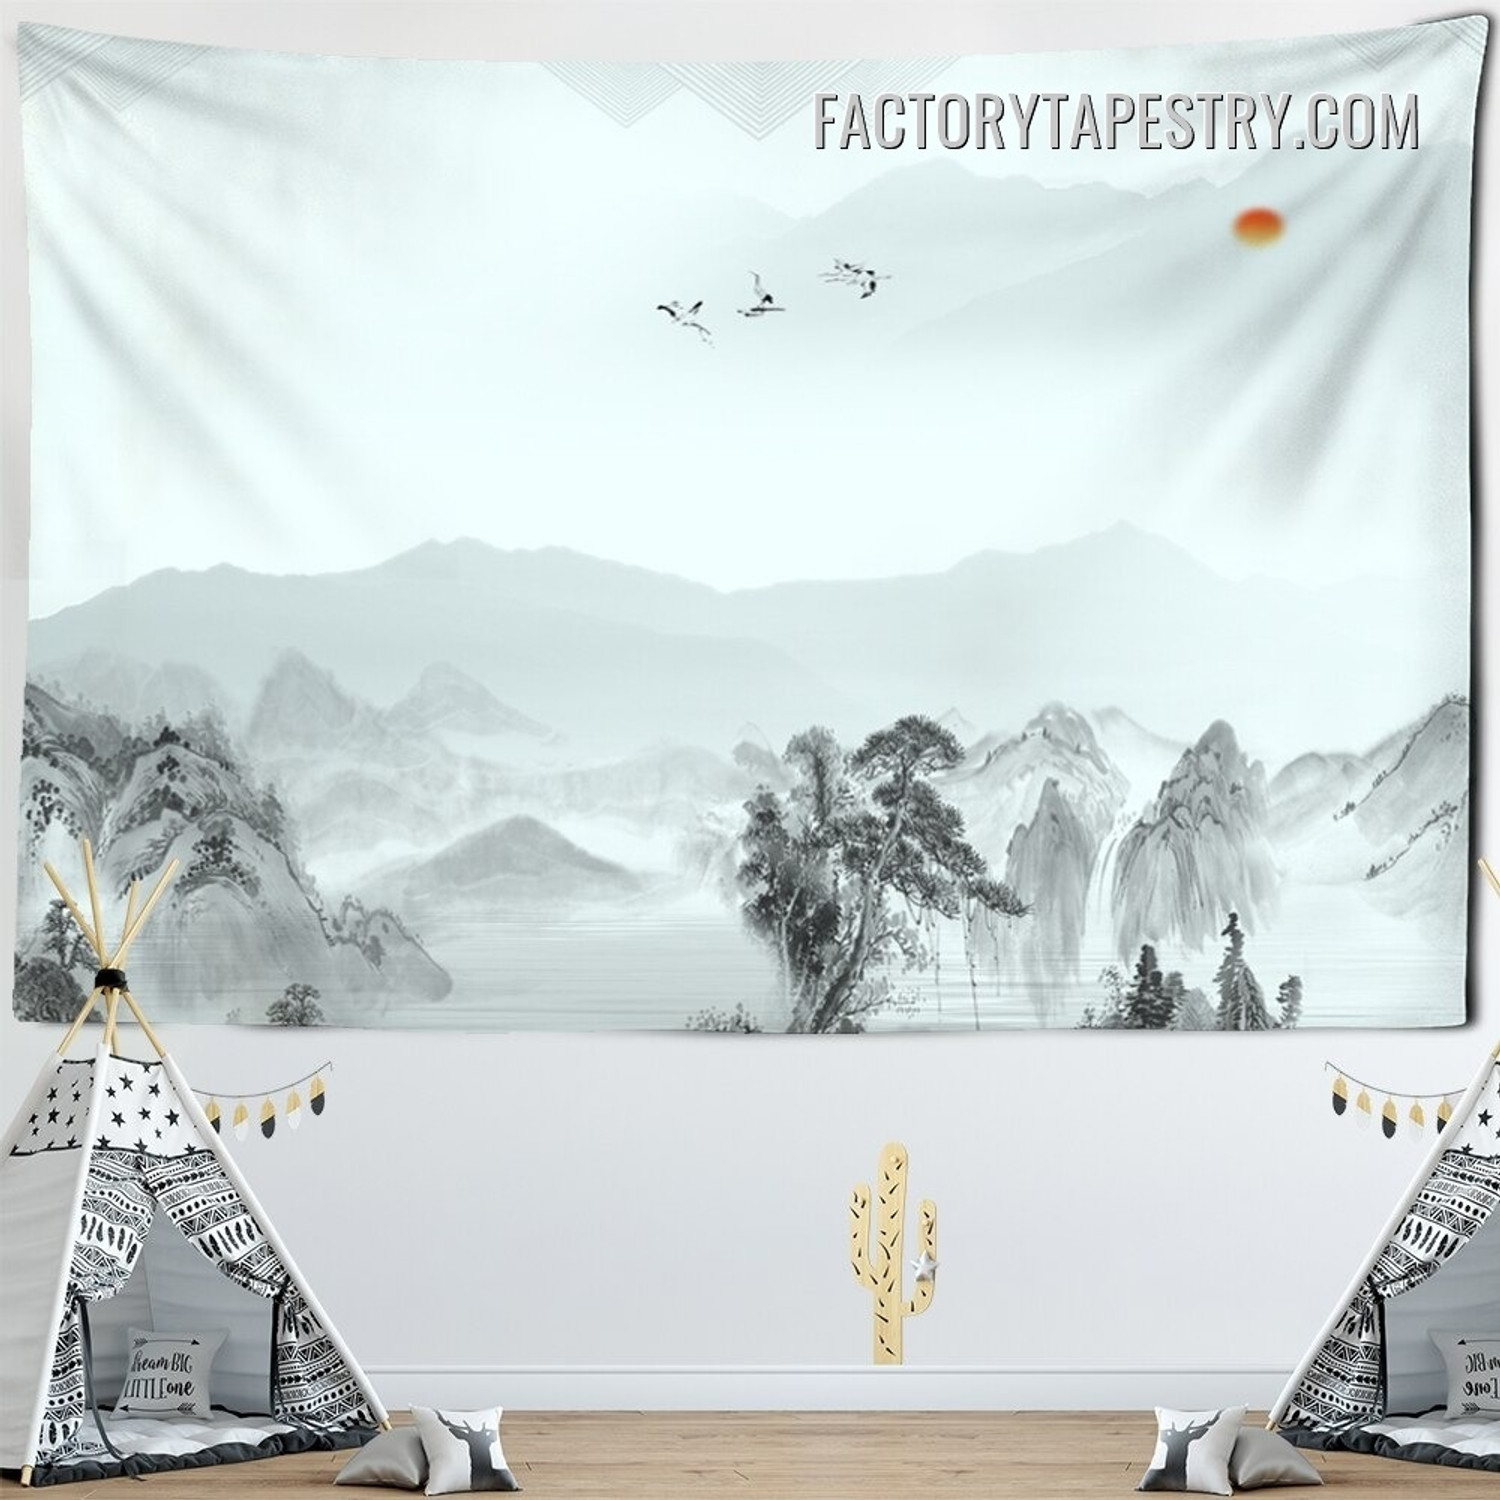 Foggy Mountains Nature Landscape Modern Wall Decor Tapestry